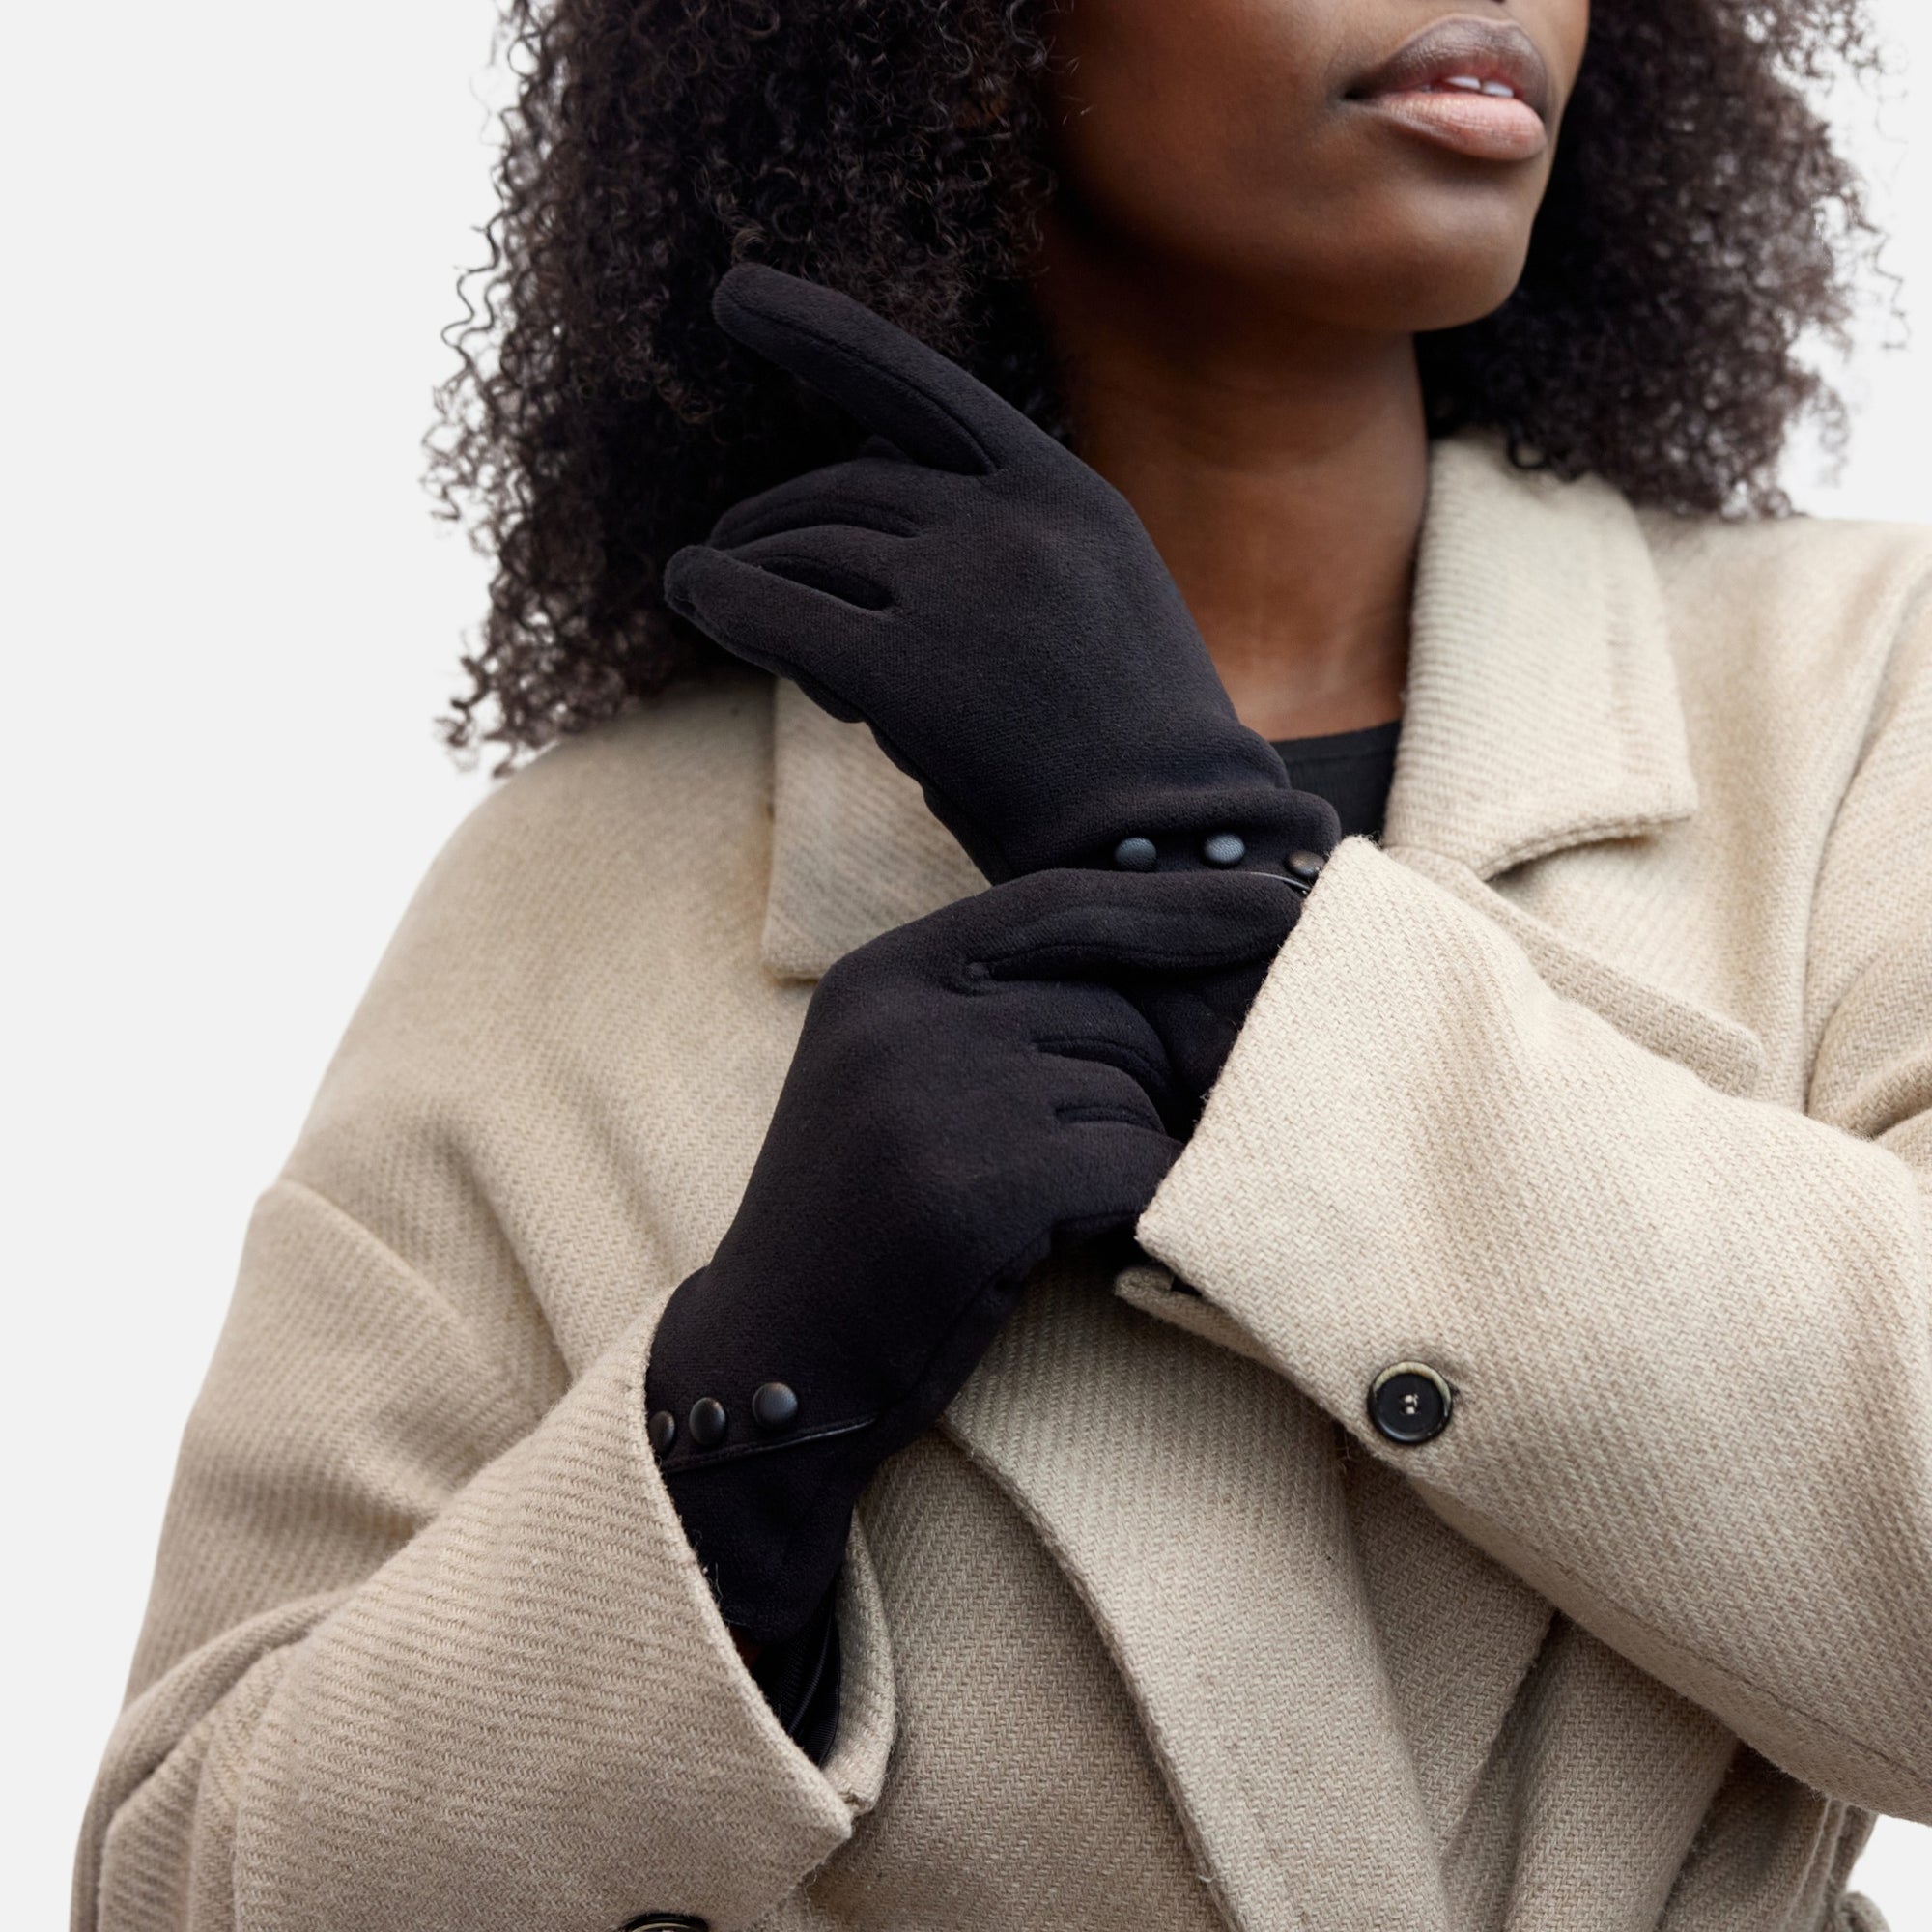 Black touchscreen gloves with buttons